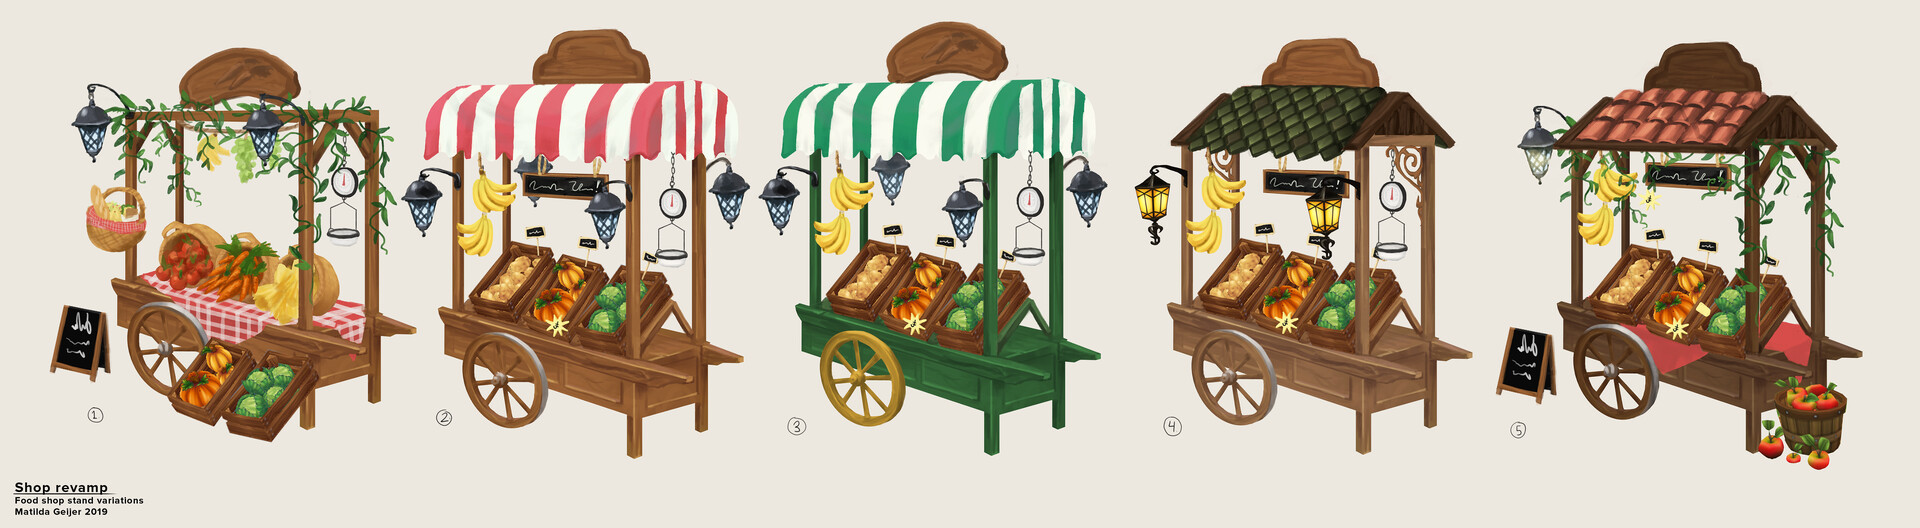 Shop stand variations